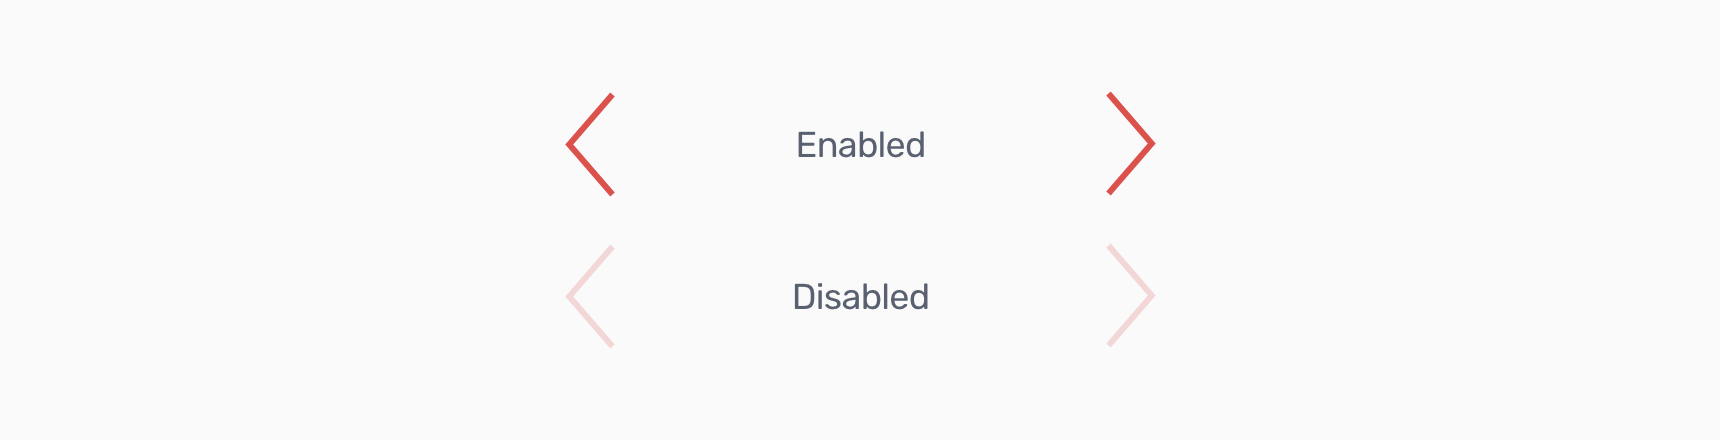 The illustration shows two different arrow states: enabled and disabled. By default, the disabled arrows are semitransparent.